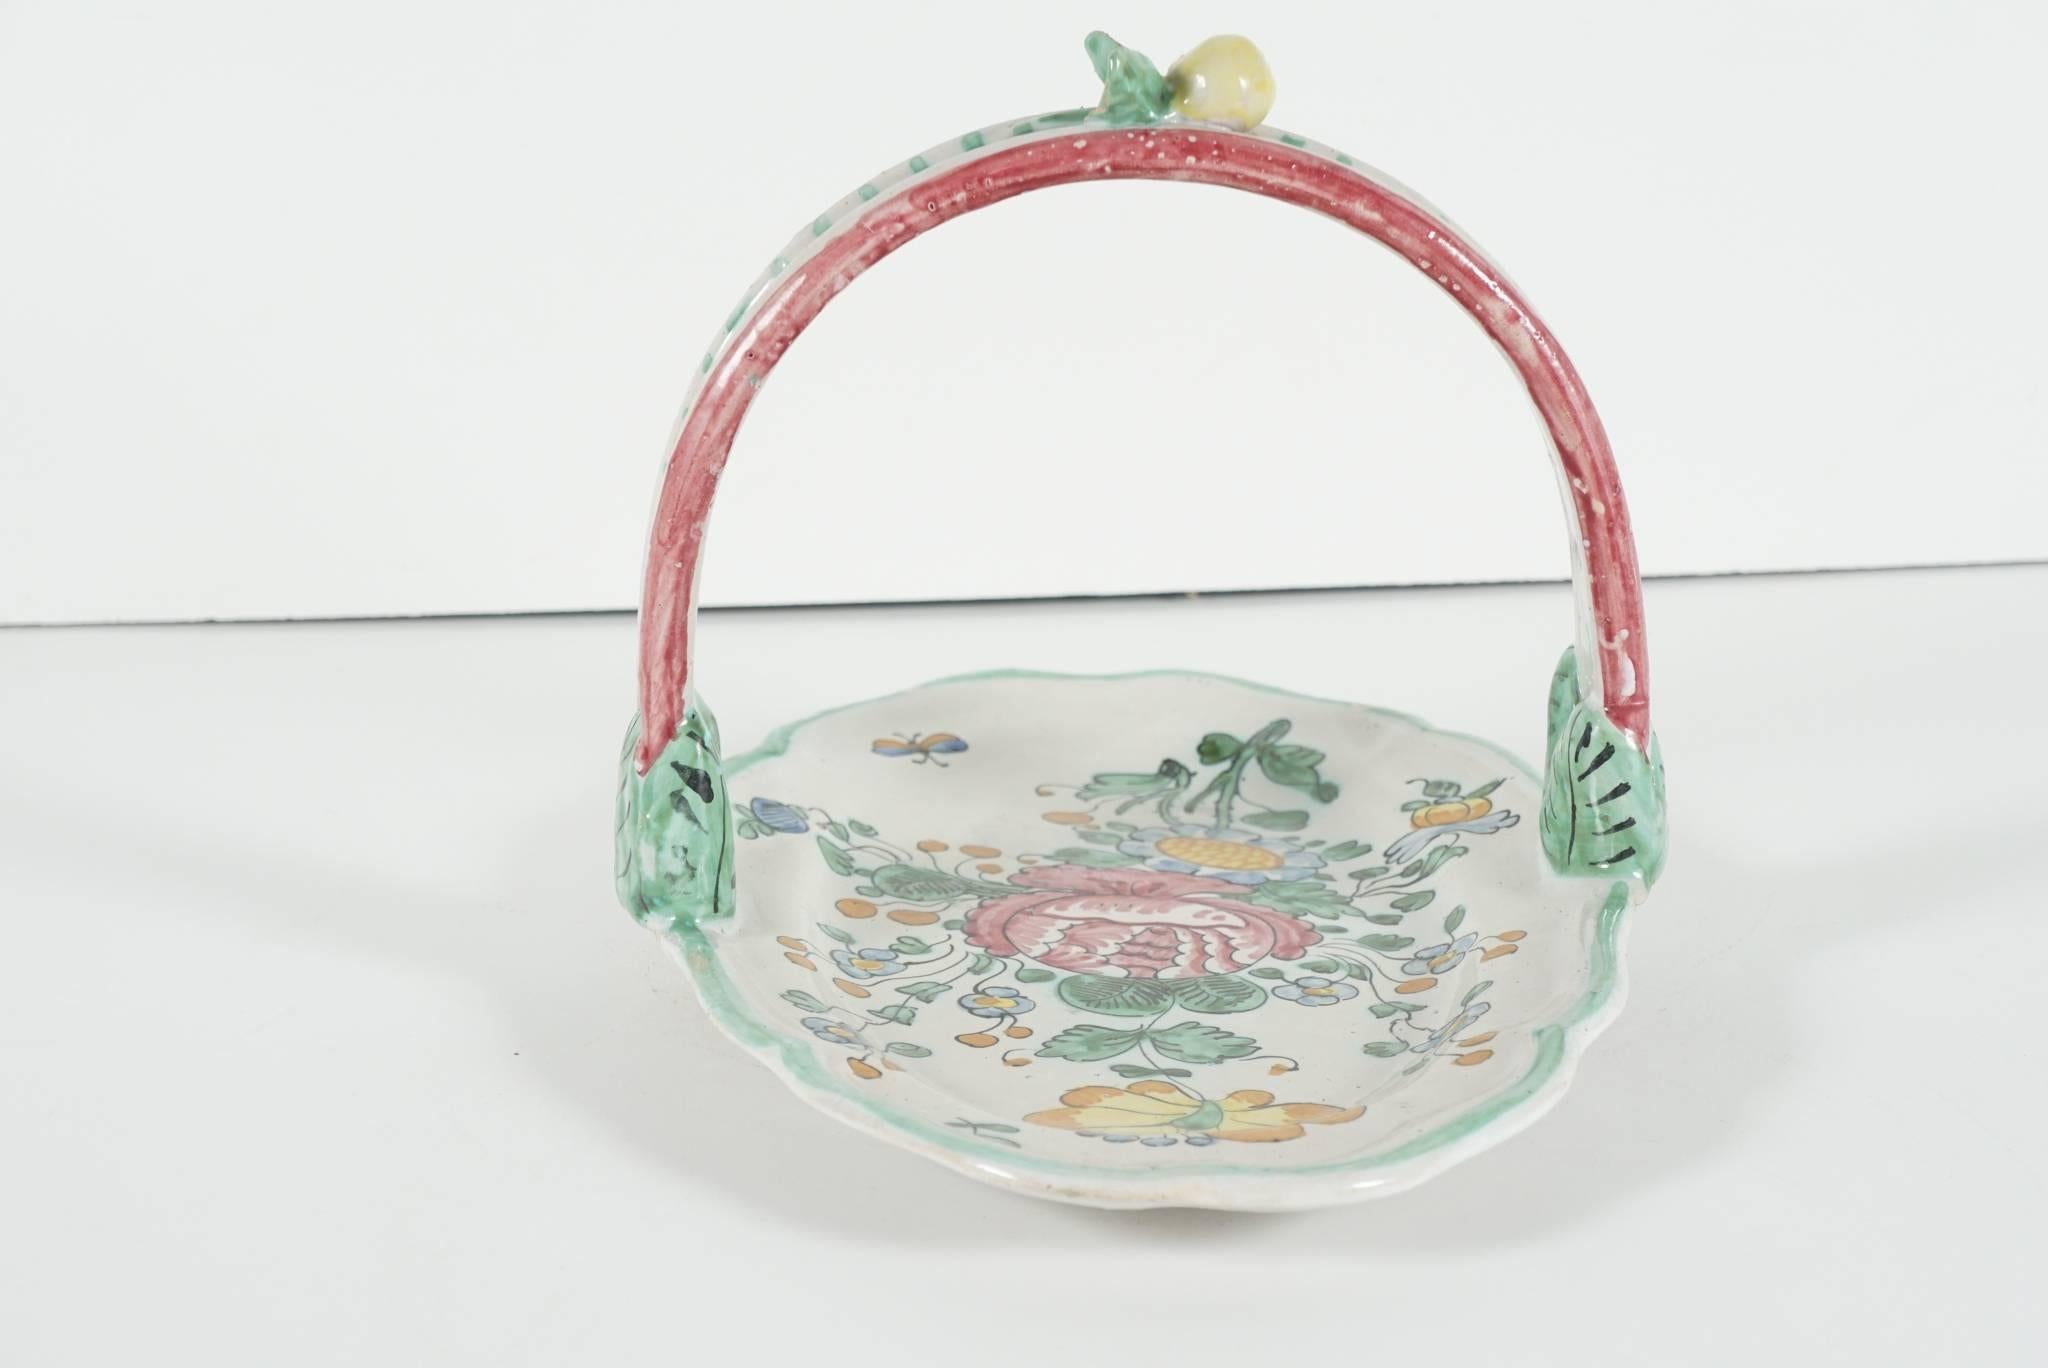 This earthen ware handmade tray comes from Italy and was made as a lighthearted answer to refined city porcelains used in upscale houses. Humble but hand made the decoration is charming and refined. Painted in light colors showing flowers and leaves